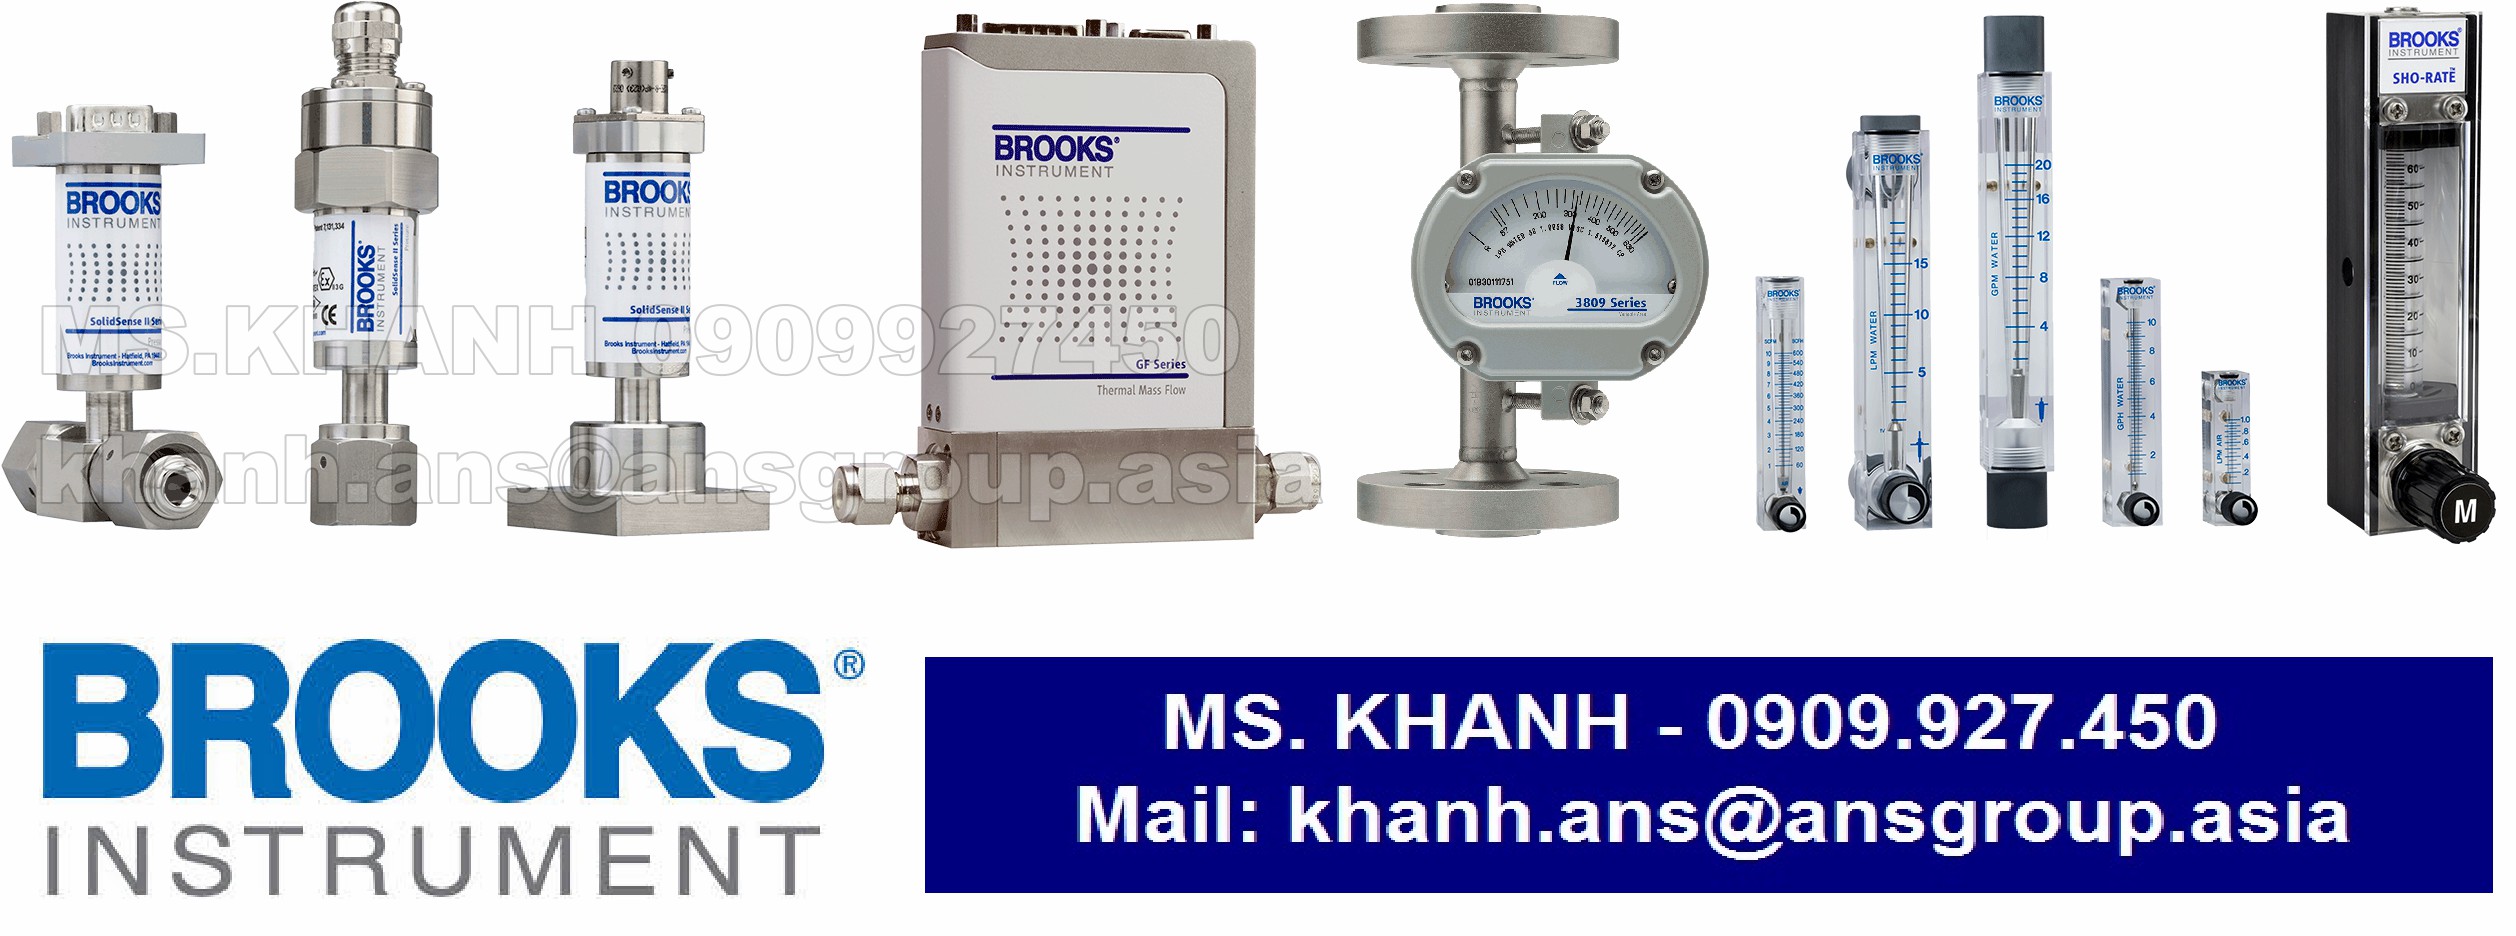 may-do-luu-luong-3809gbd08dbab1d2a000-metal-tube-variable-area-flow-meters-brook-instrument-vietnam-1.png